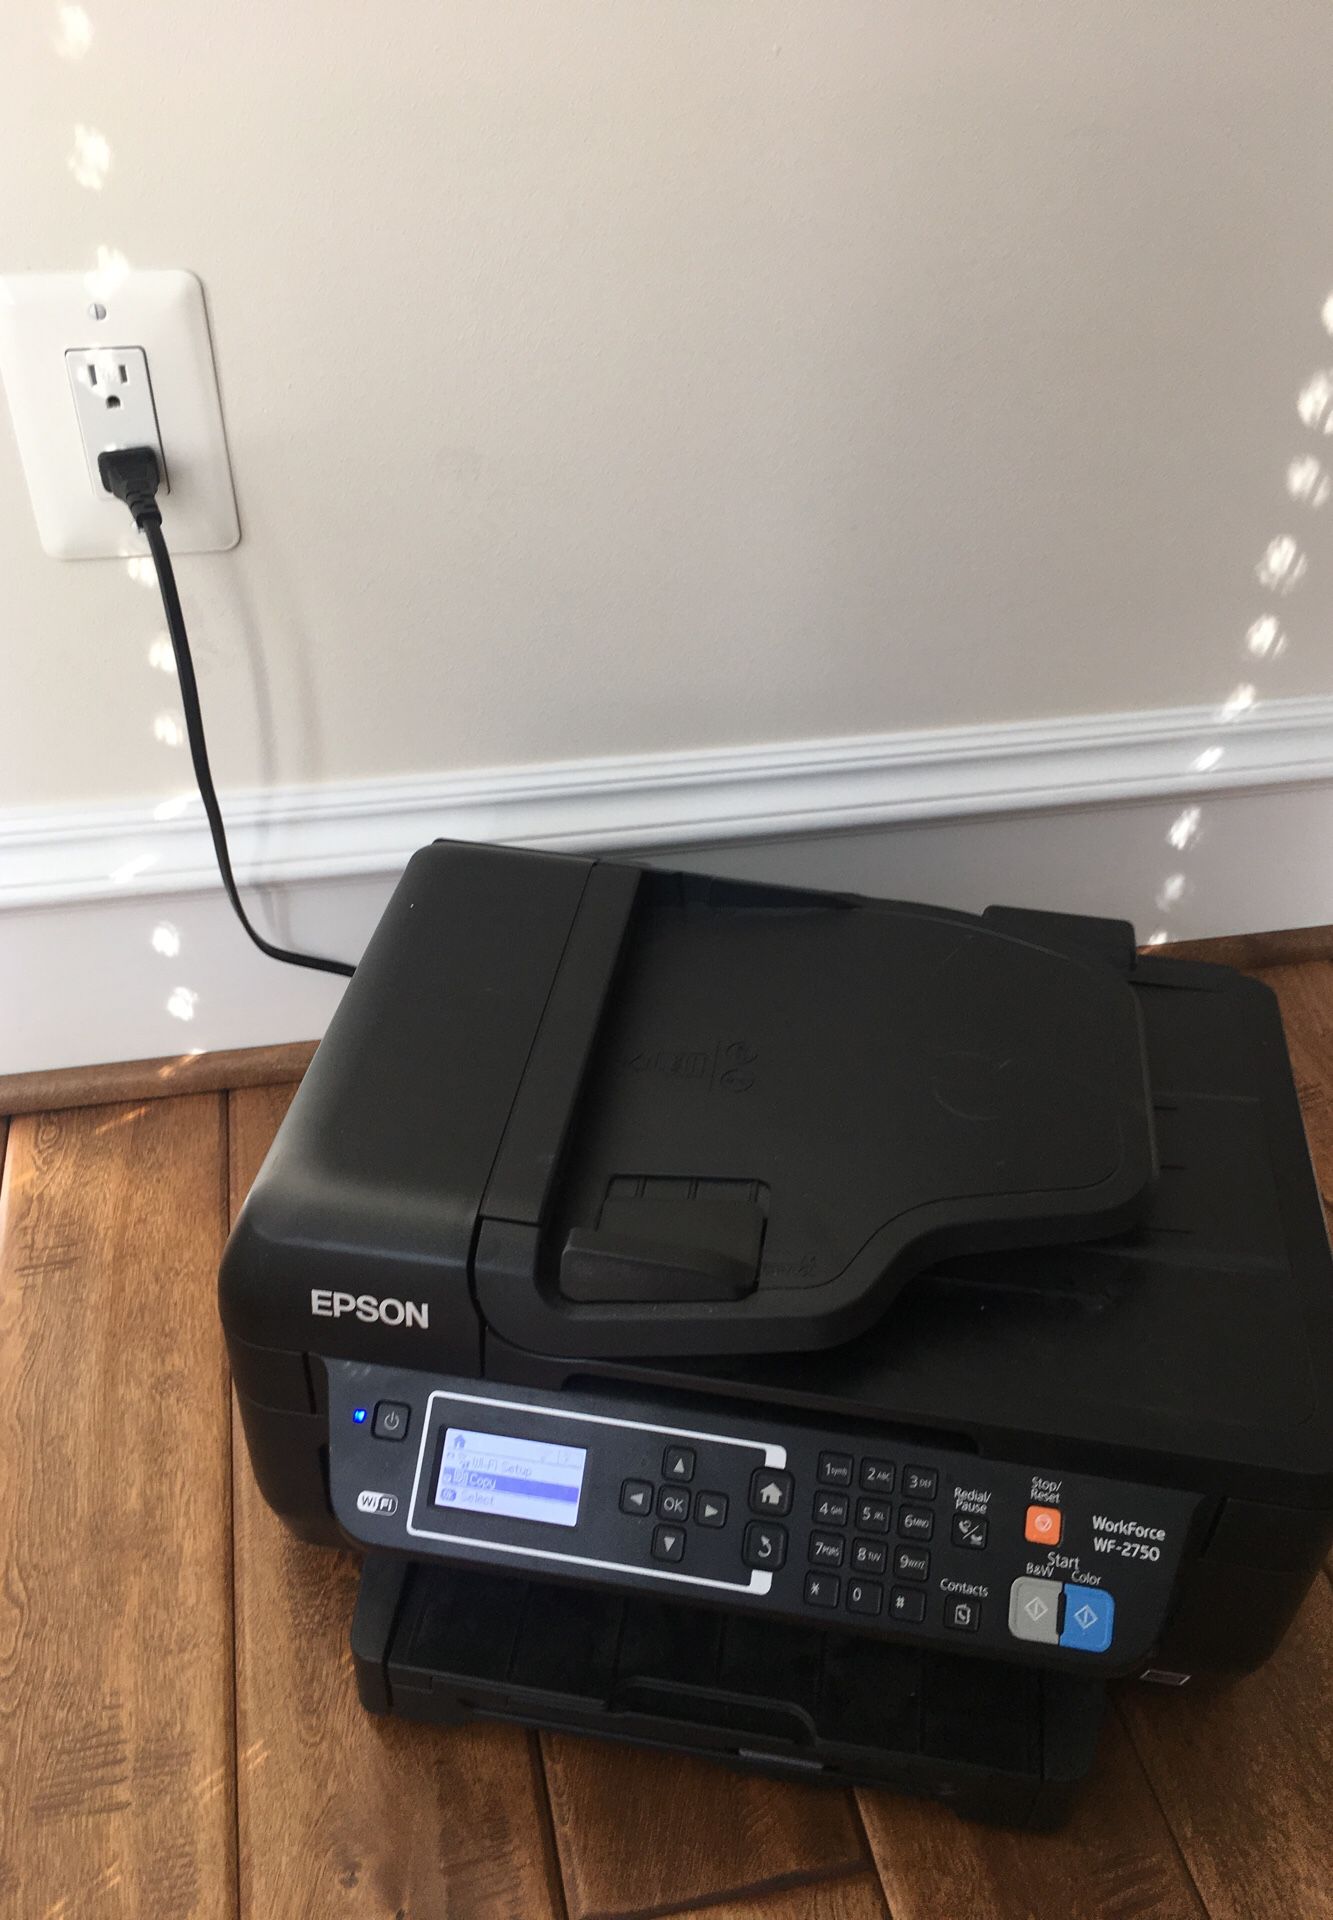 Epson WorkForce WF-2750 All-In-One Printer Scanner fax and Wireless